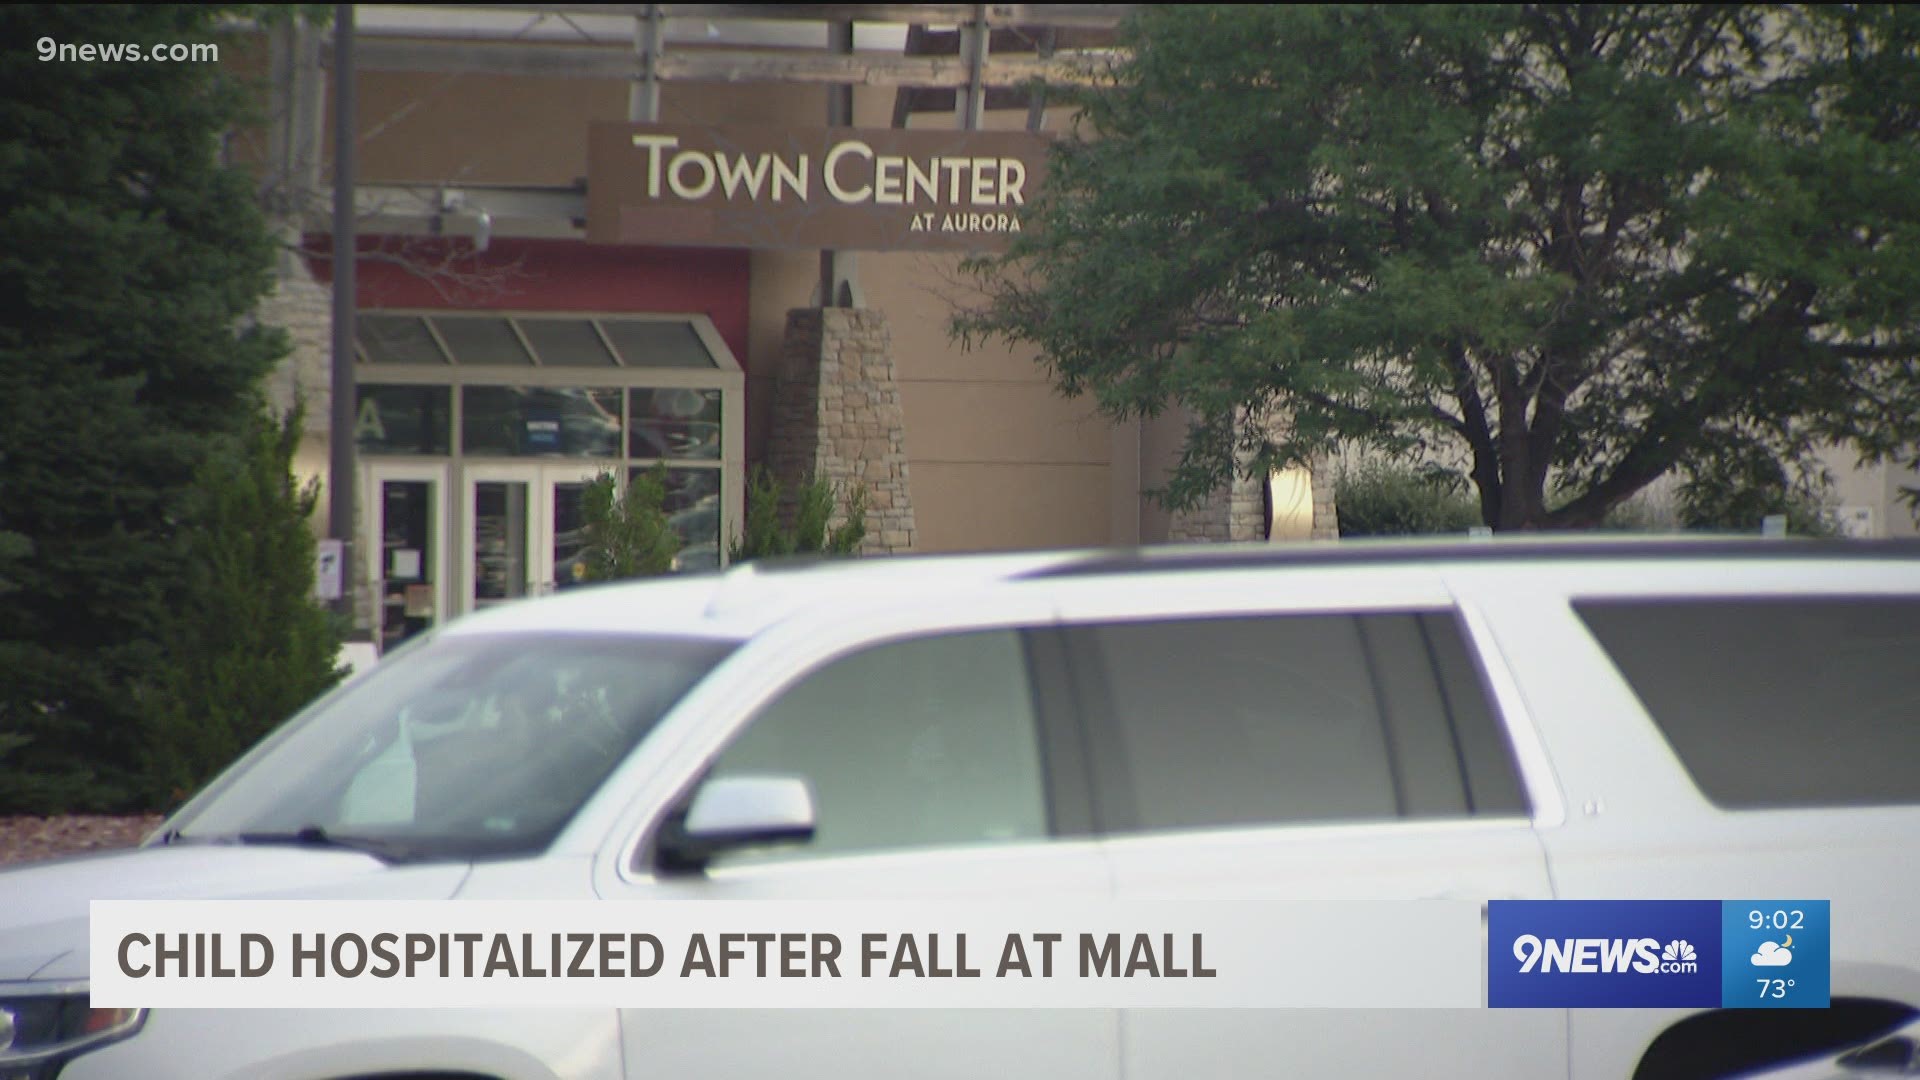 A 2-year-old boy is in the hospital in critical condition after falling from the second floor at the Aurora mall Sunday, police said.